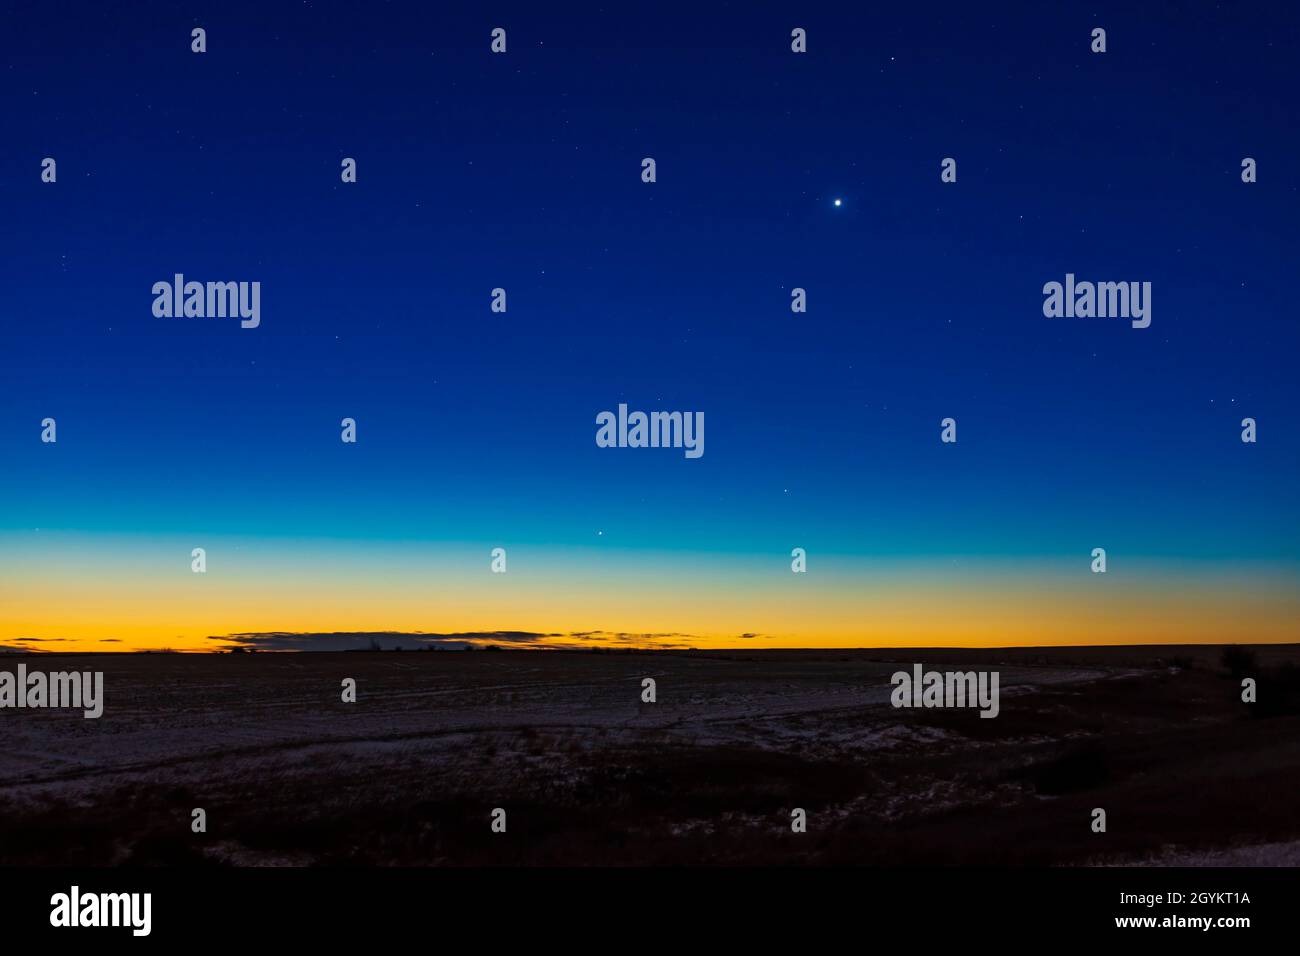 The two inner planets as morning “stars” in the pre-dawn sky, Nov. 9, 2020, with Mercury below and brighter Venus above. The star Spica is  above and Stock Photo